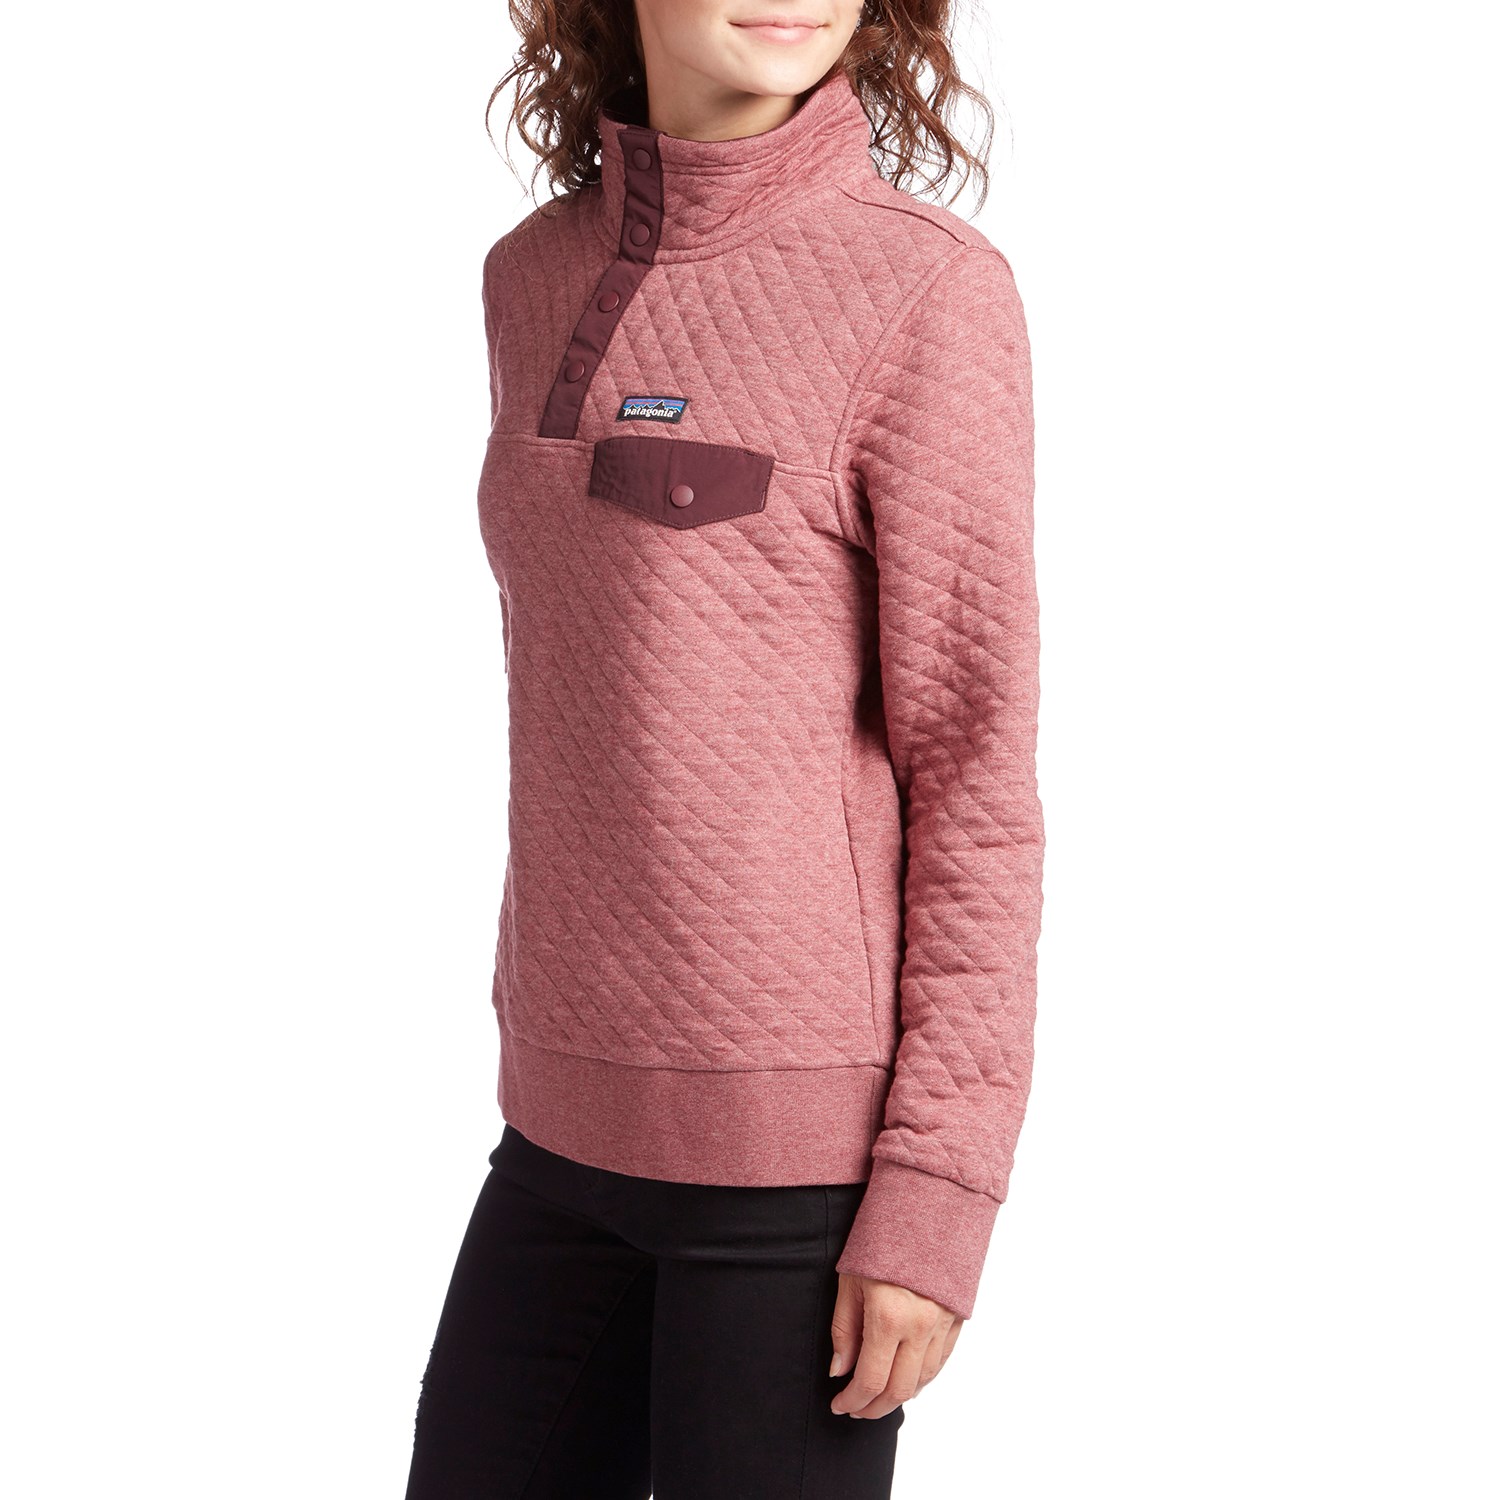 Patagonia Organic Cotton Quilt Snap-T Pullover - Women's